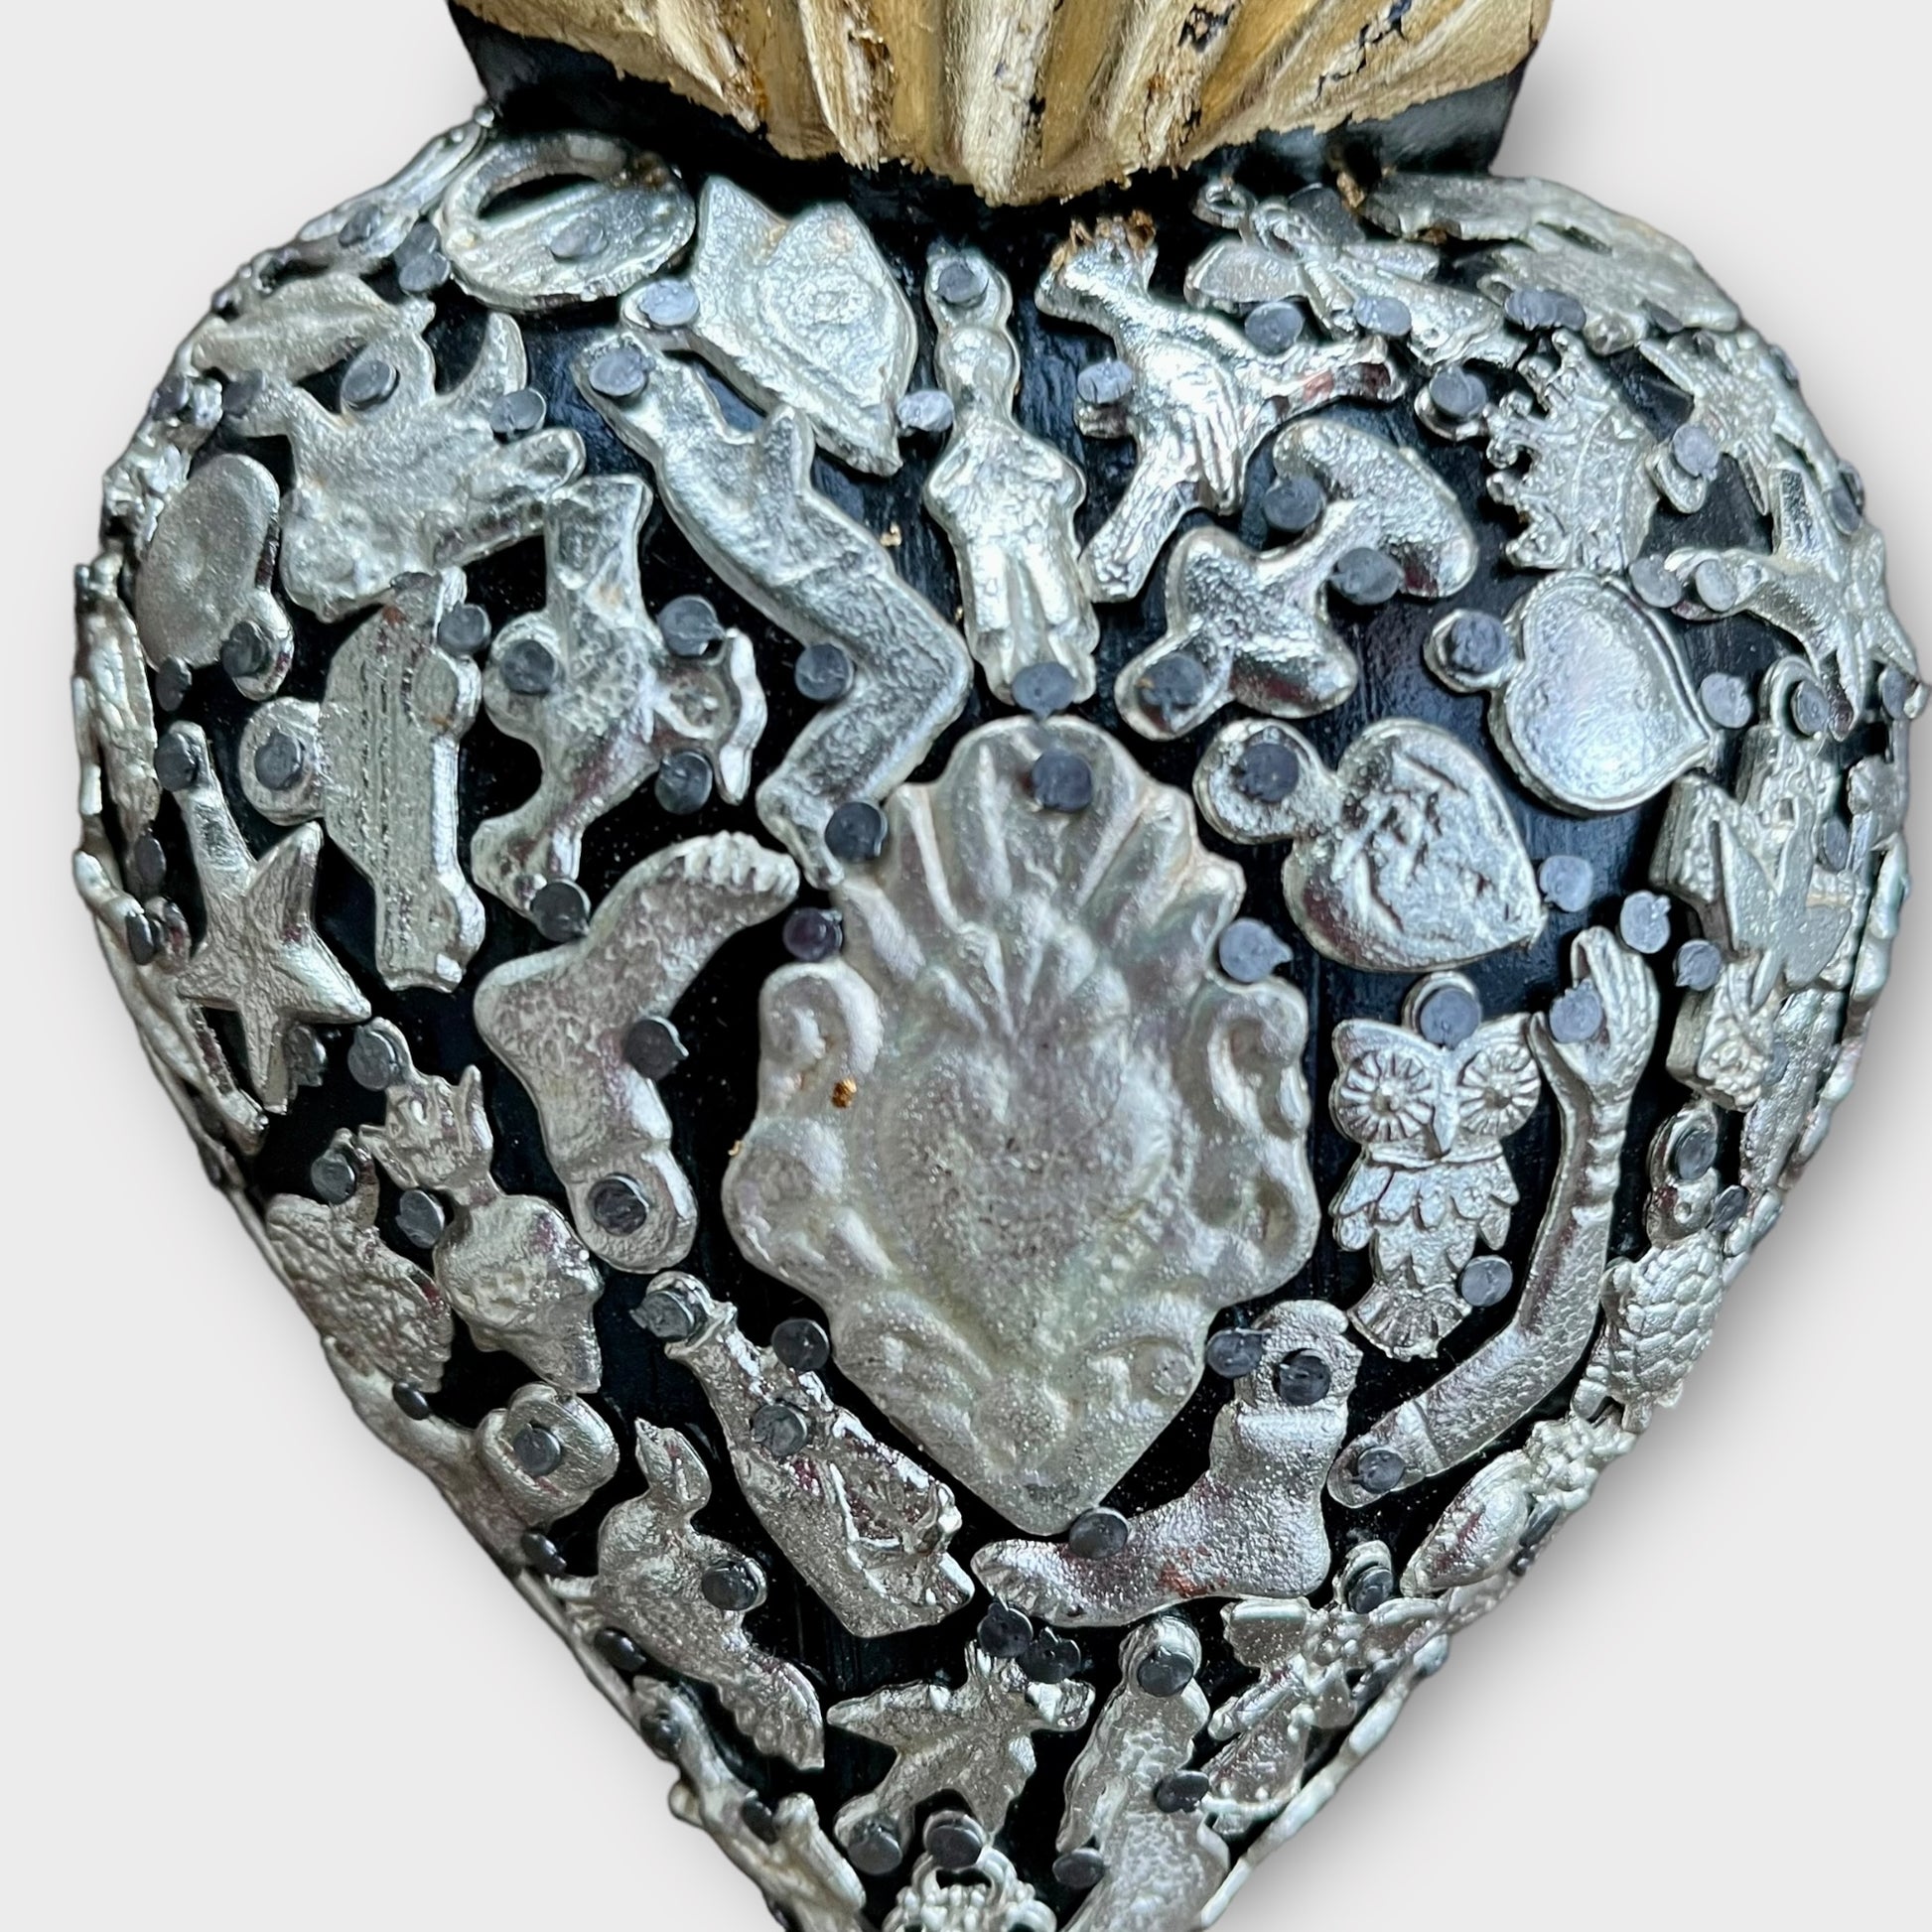 Mexican Wood Milagros charm Heart Corazon close up